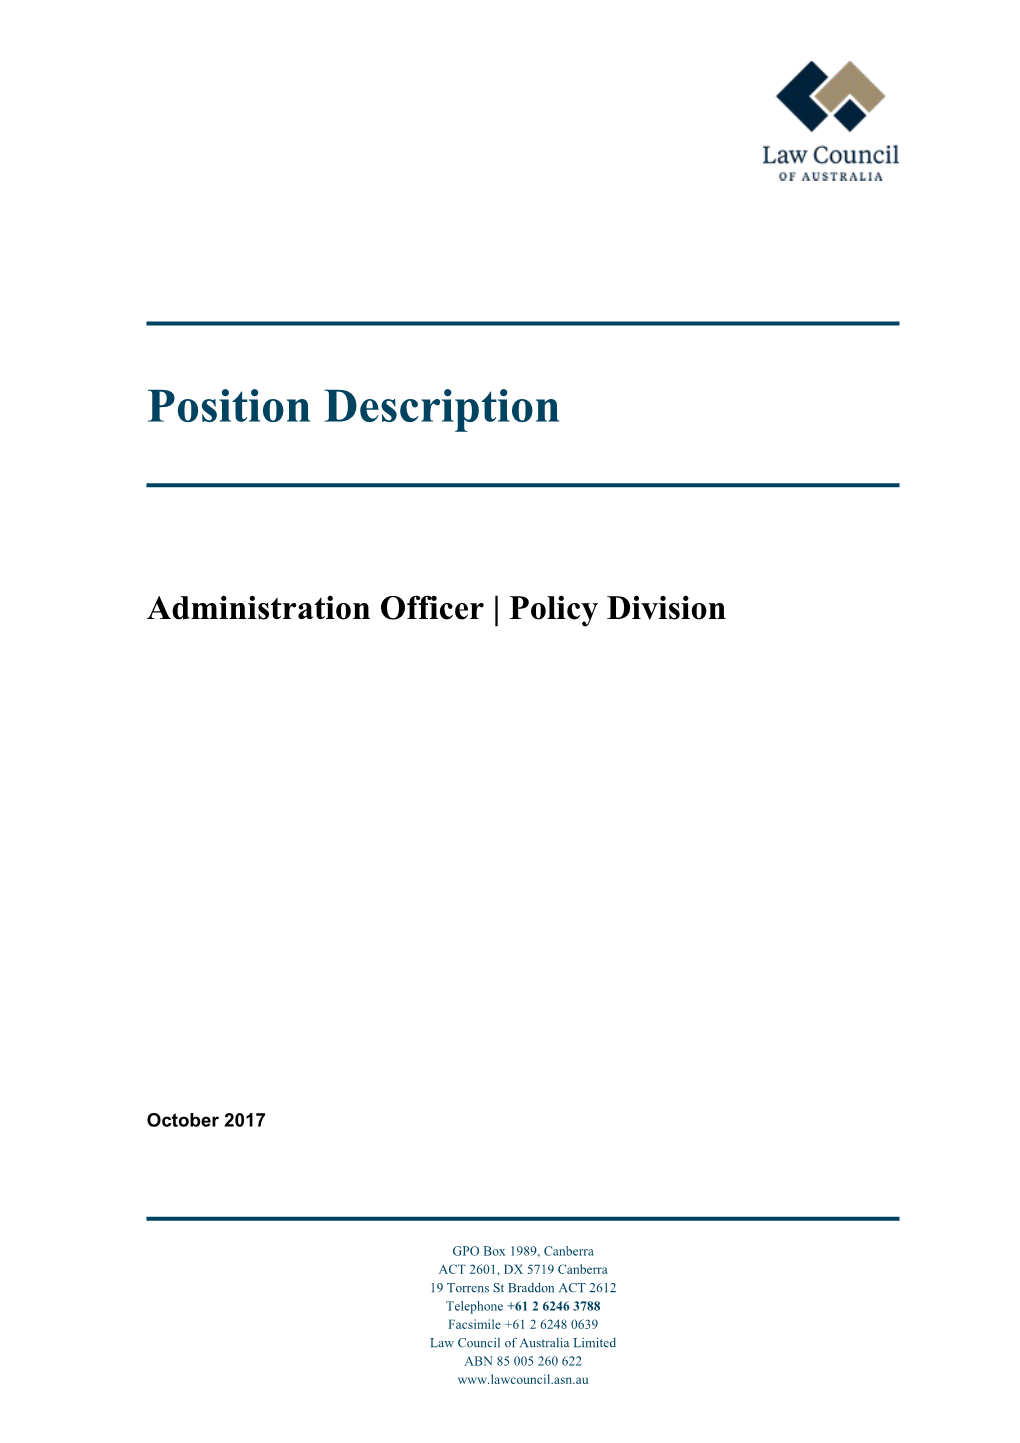 Administration Officer Policy Division